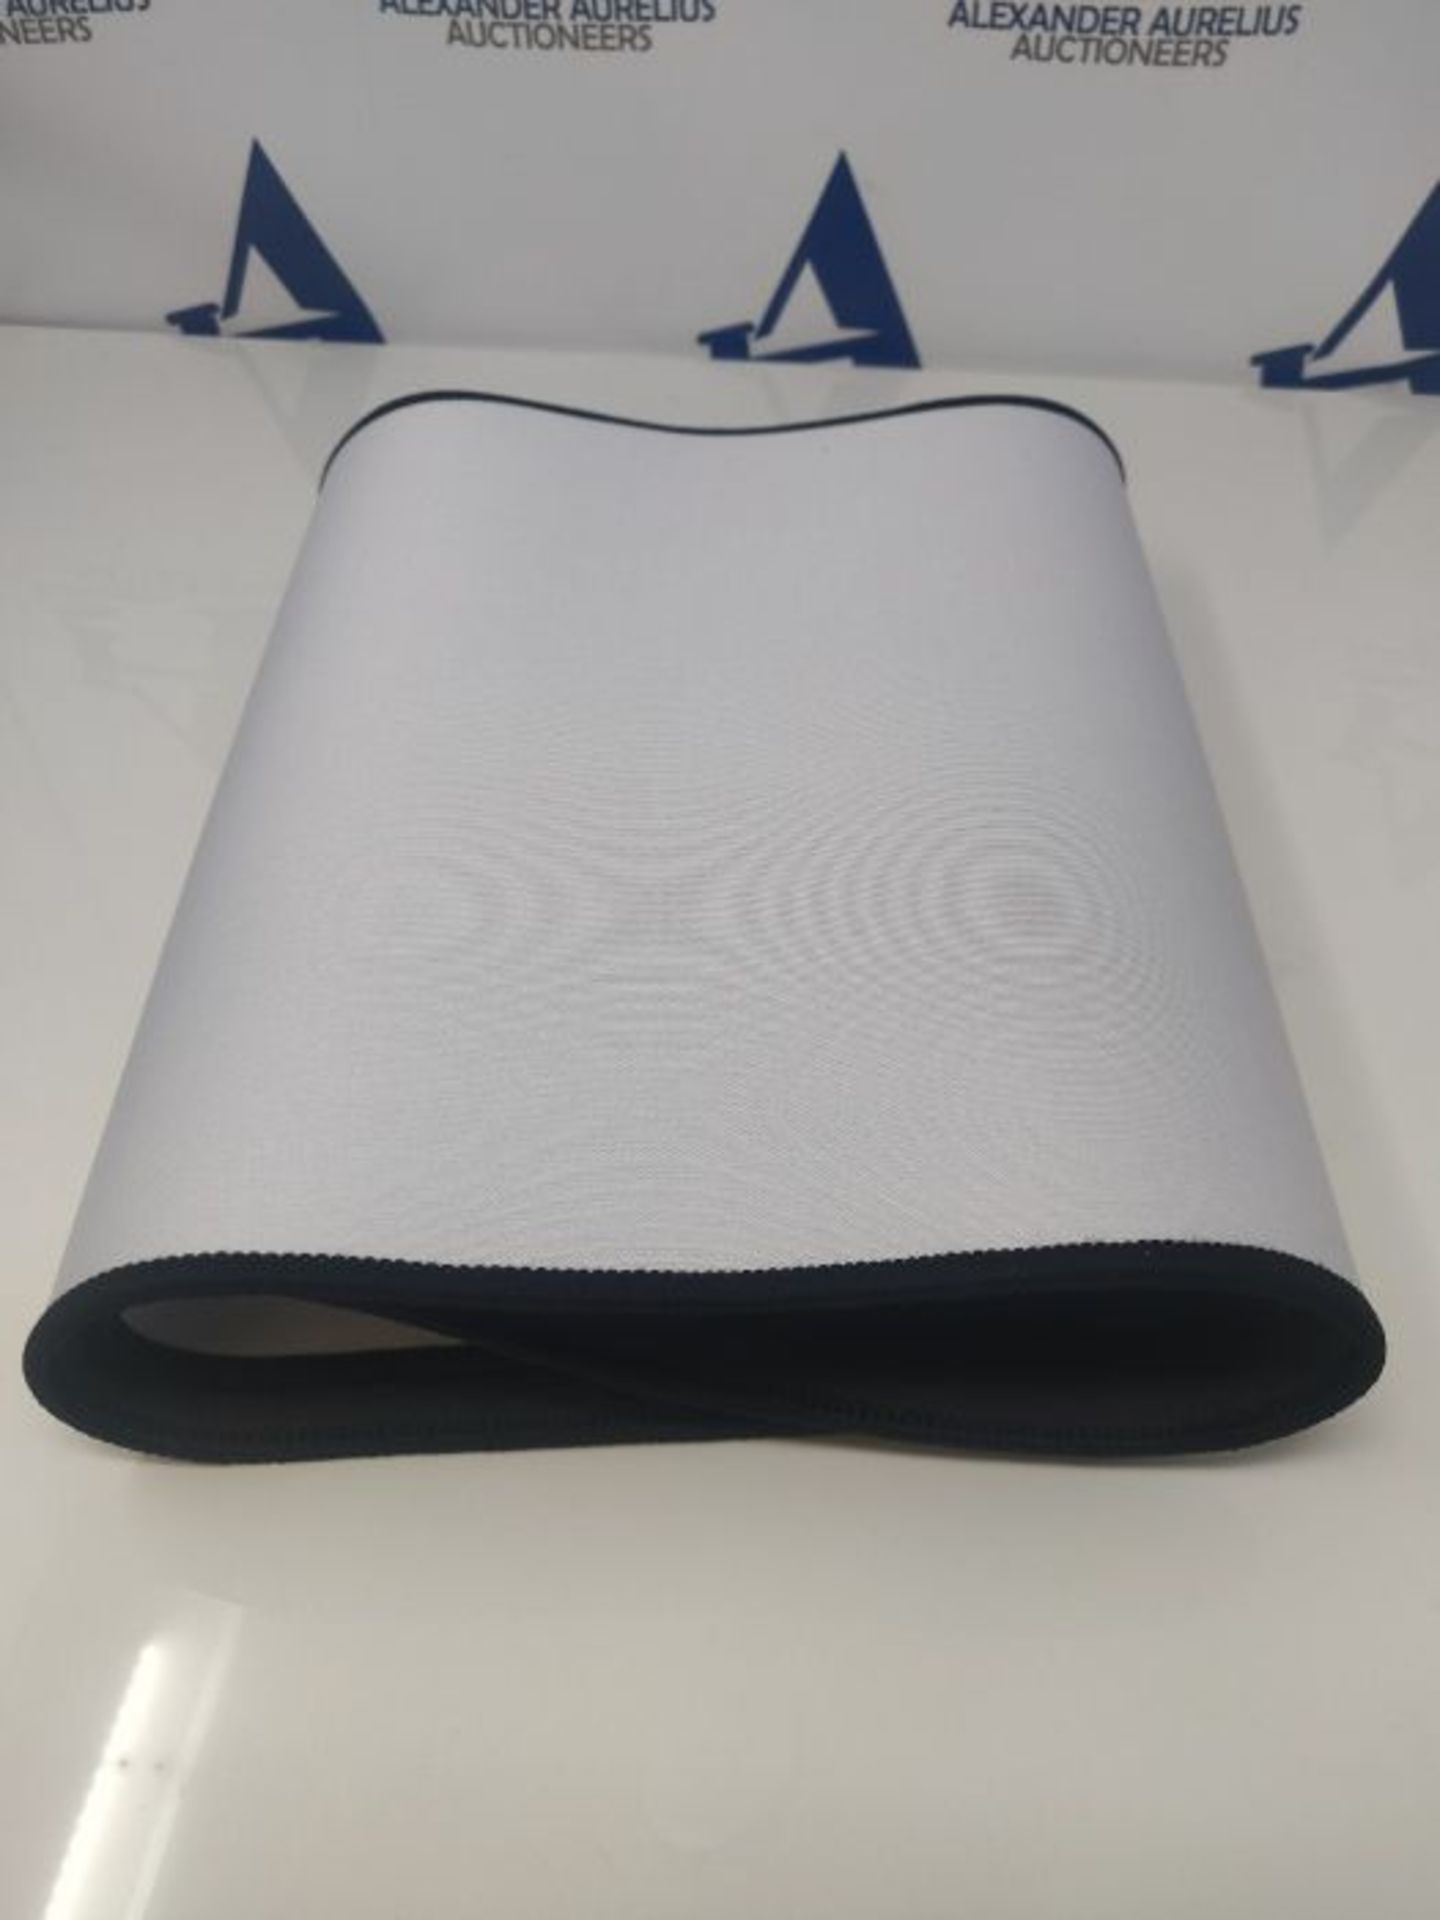 Glorious PC Gaming Race Mouse Pad - Extended, White - Image 3 of 3